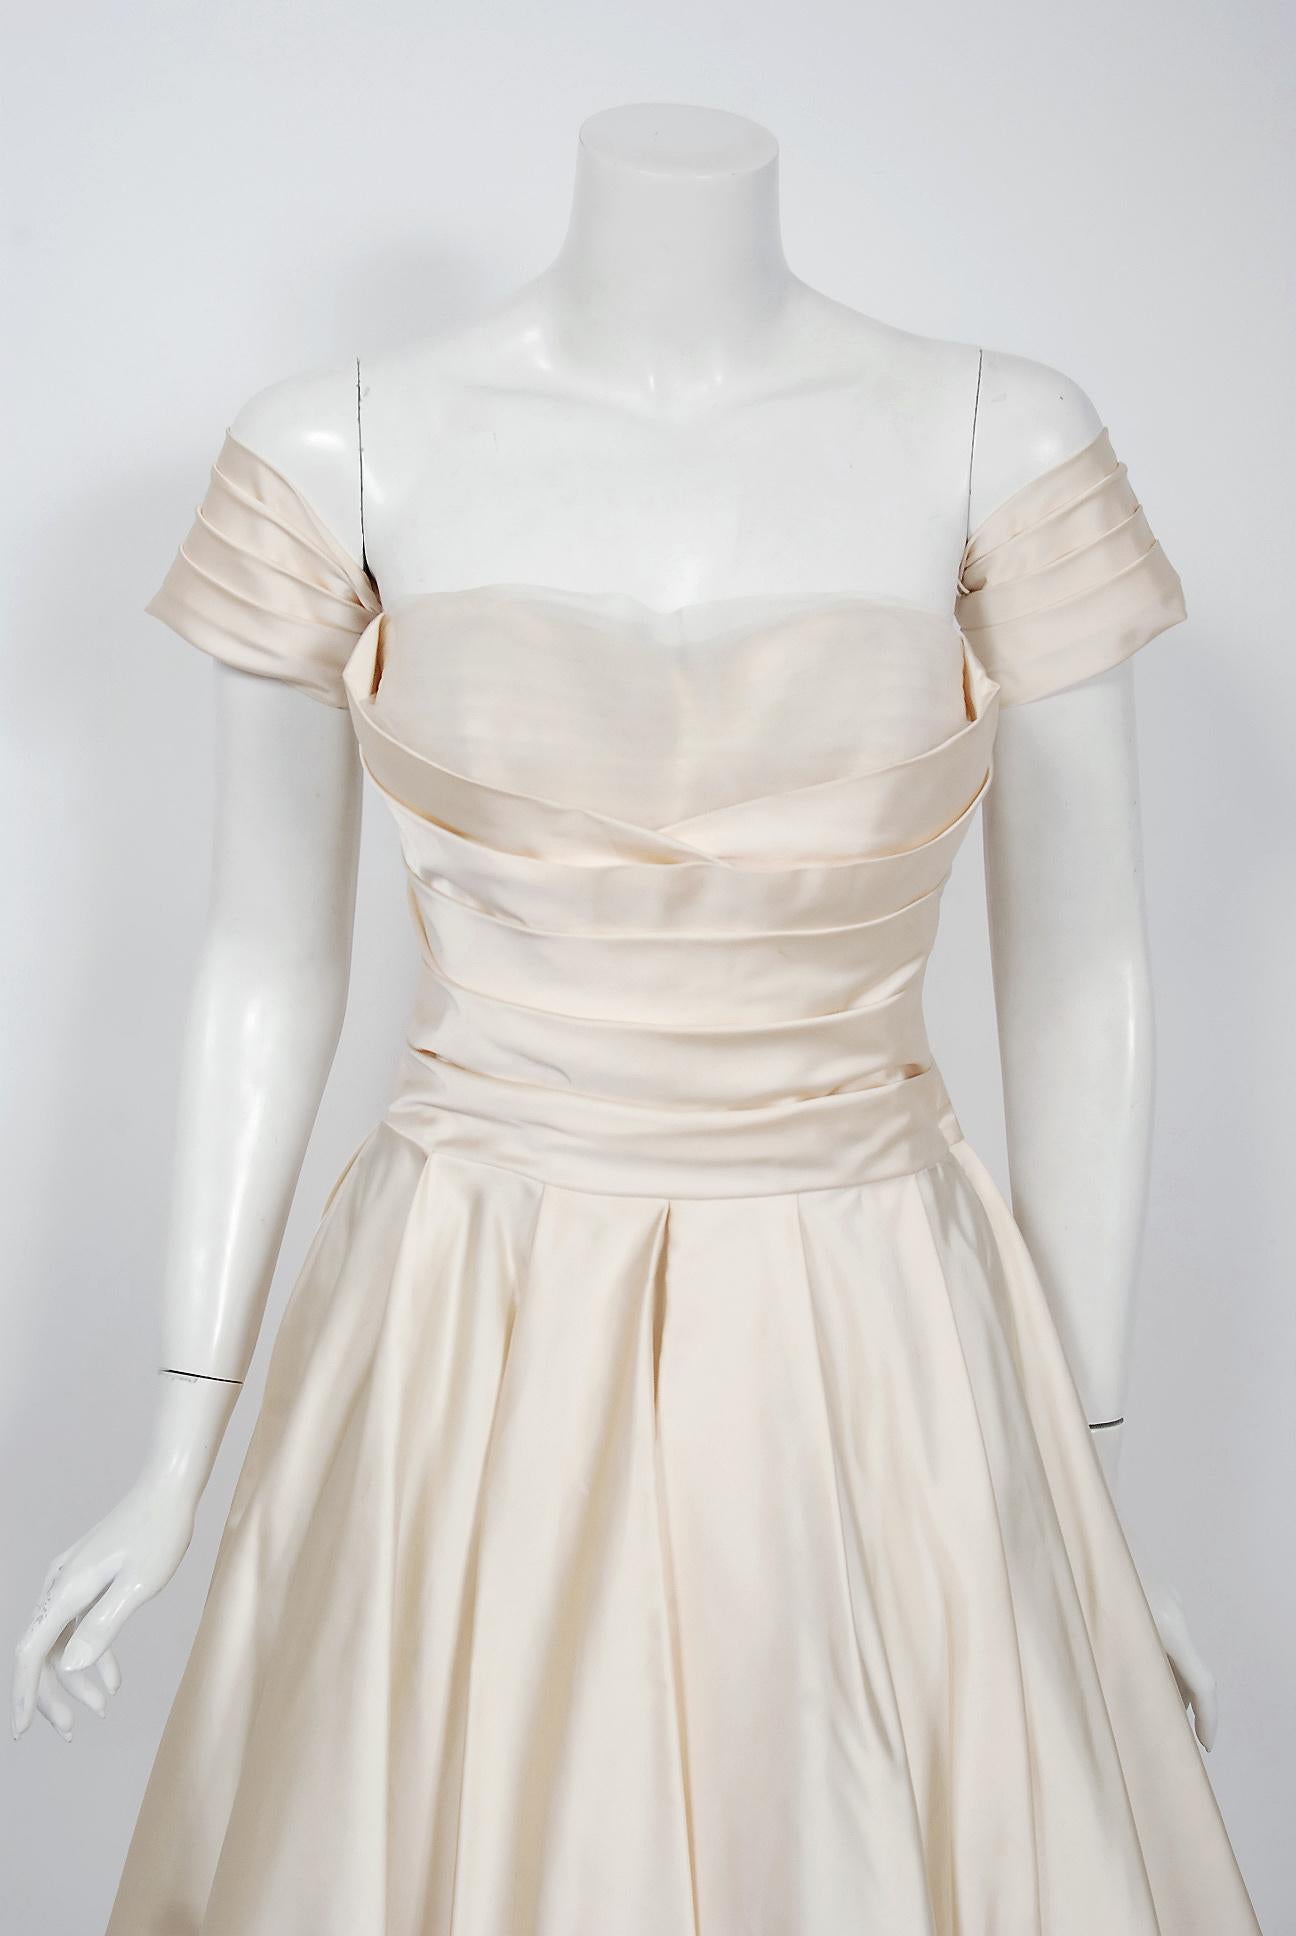 A magnificent 1950's creation by the iconic dress designer Fred Perlberg. It's hard to believe she has never been worn and still has the original Bonwit Teller store tags! This gorgeous garment is fashioned from mid-weight lined satin in the most